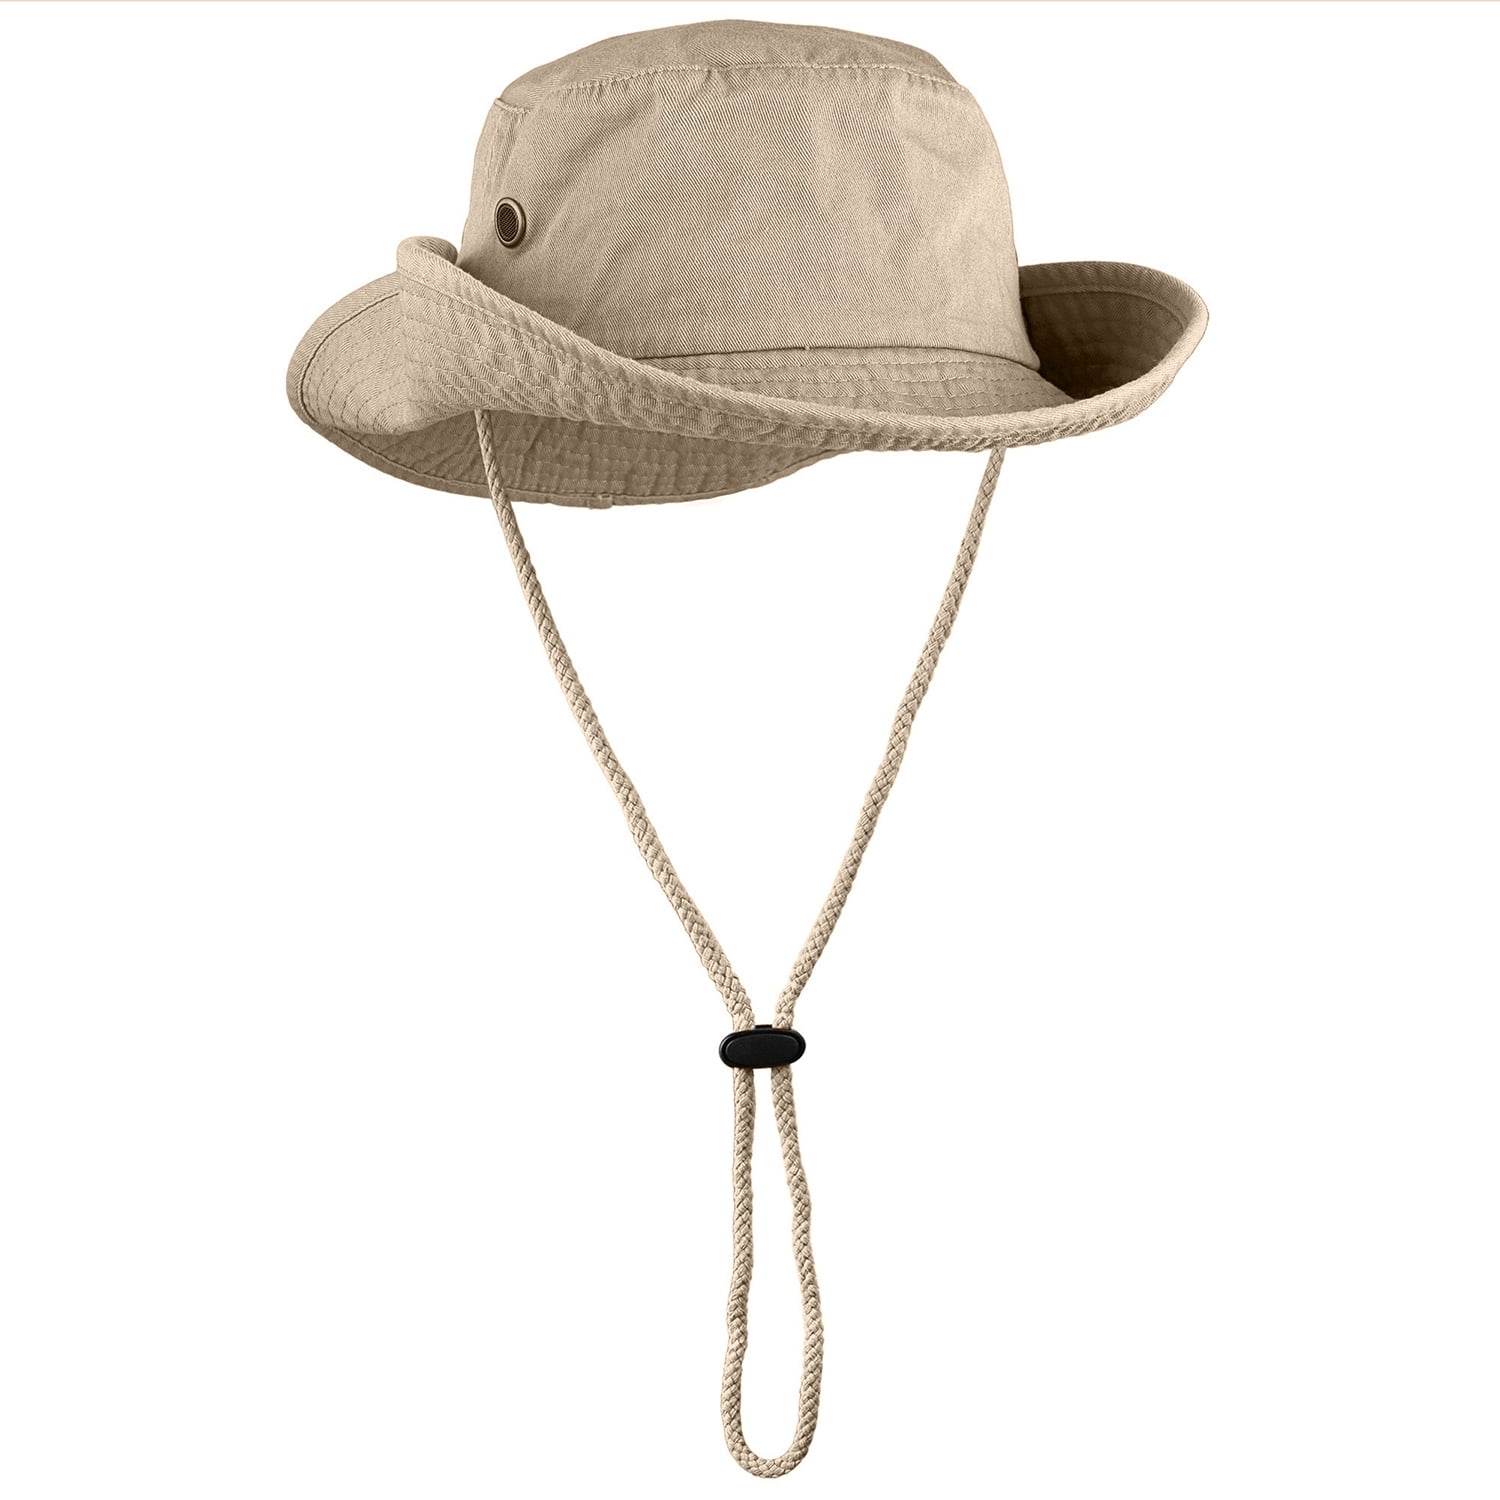 UTOWO Sun-Hats-for-Men-with-UV-Protection-Wide-Brim Bucket Fishing Safari Boonie  Hat for